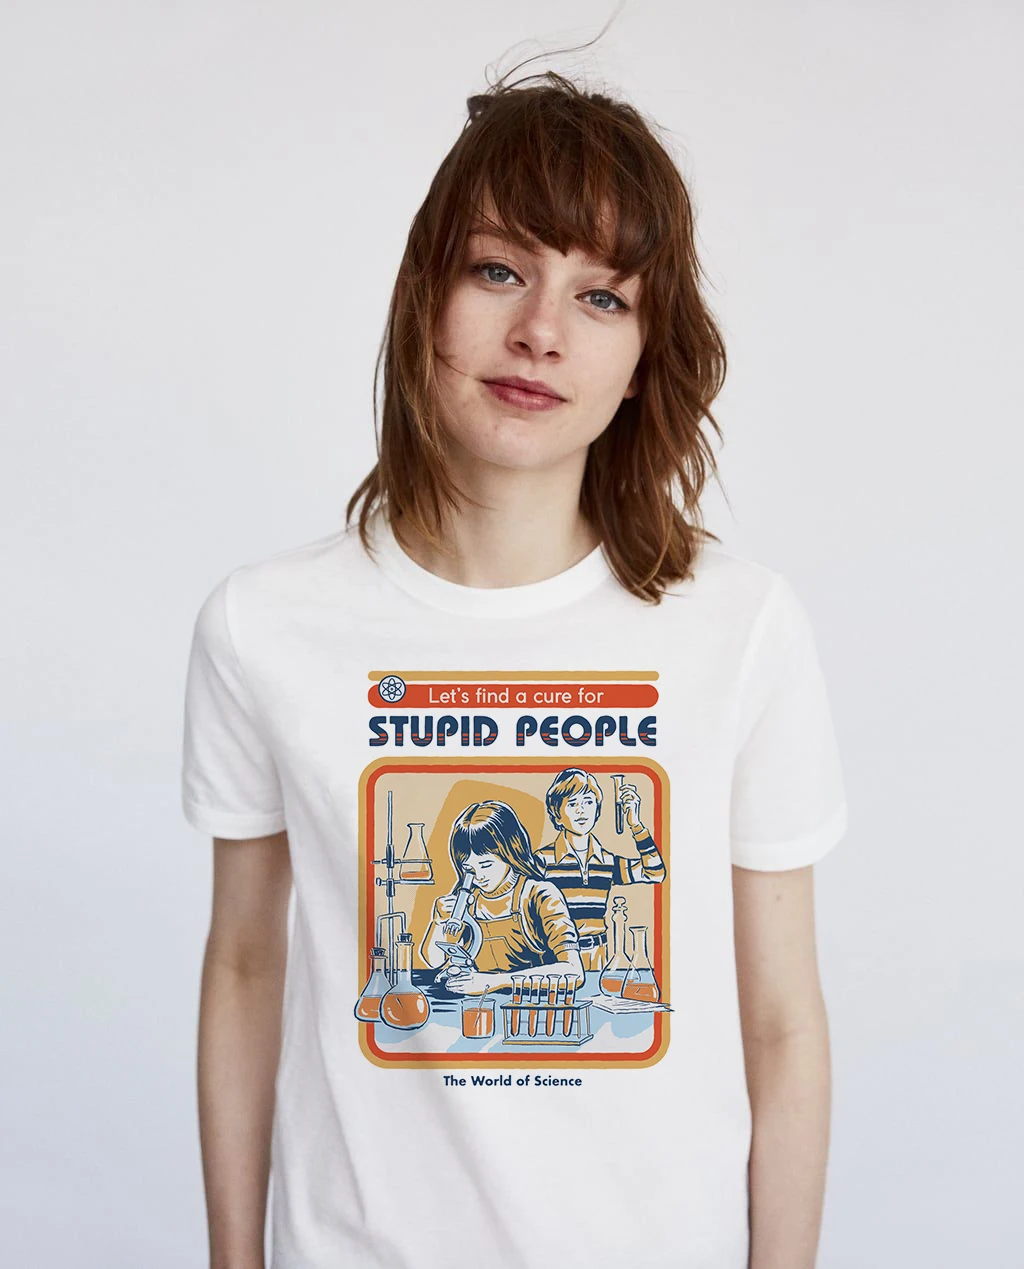 Summer Graphic Harajuk Tumblr T-Shirt Vintage Women Tops Funny Let's Find A Cure for Stupid People Letters Printed